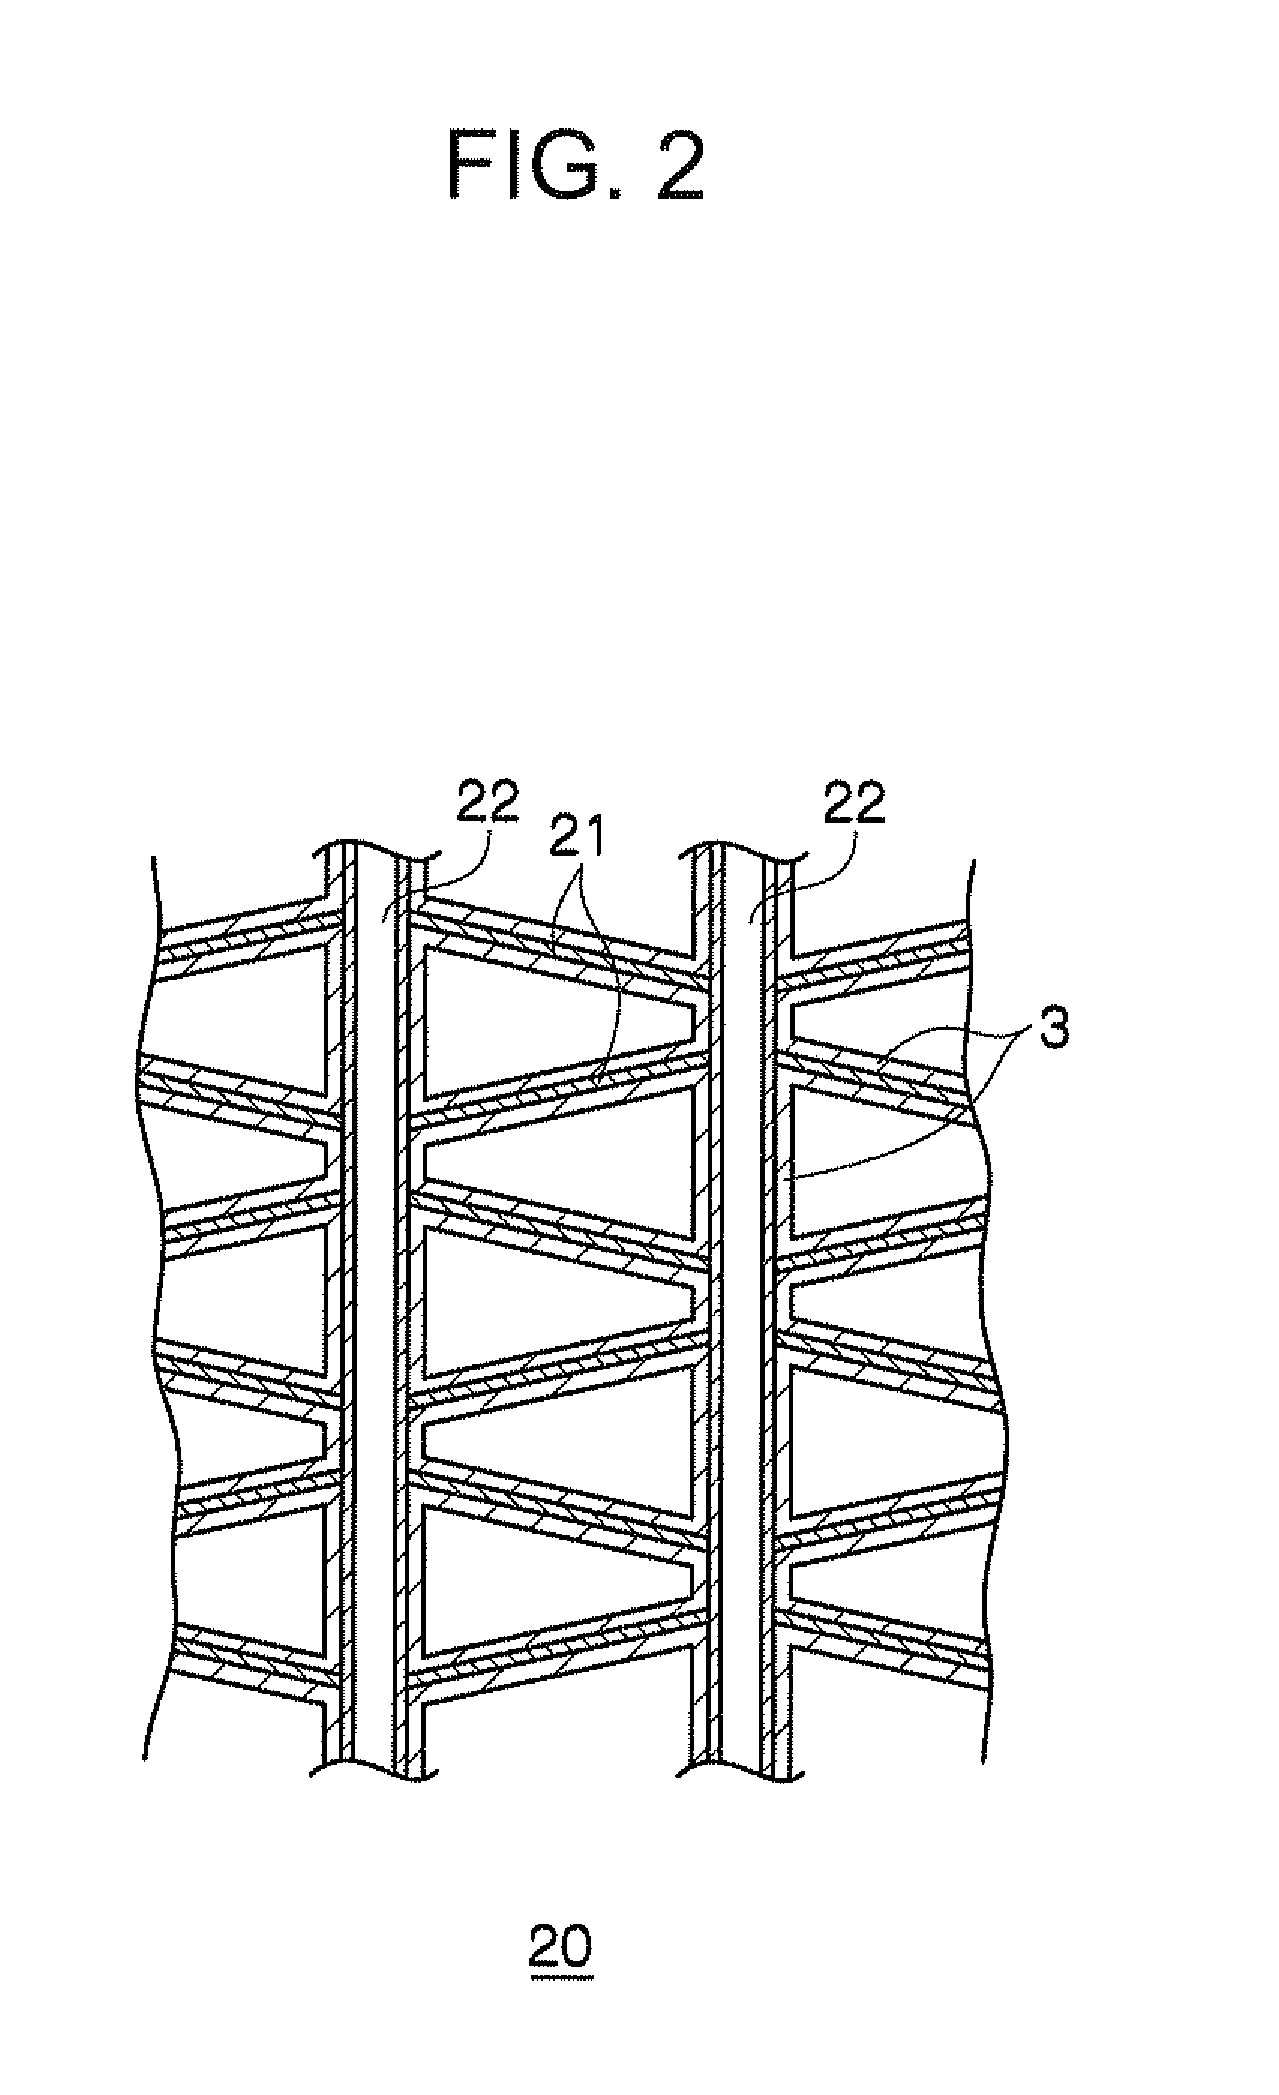 Aluminum or aluminum alloy material having surface treatment coating film, and method for treating a surface thereof